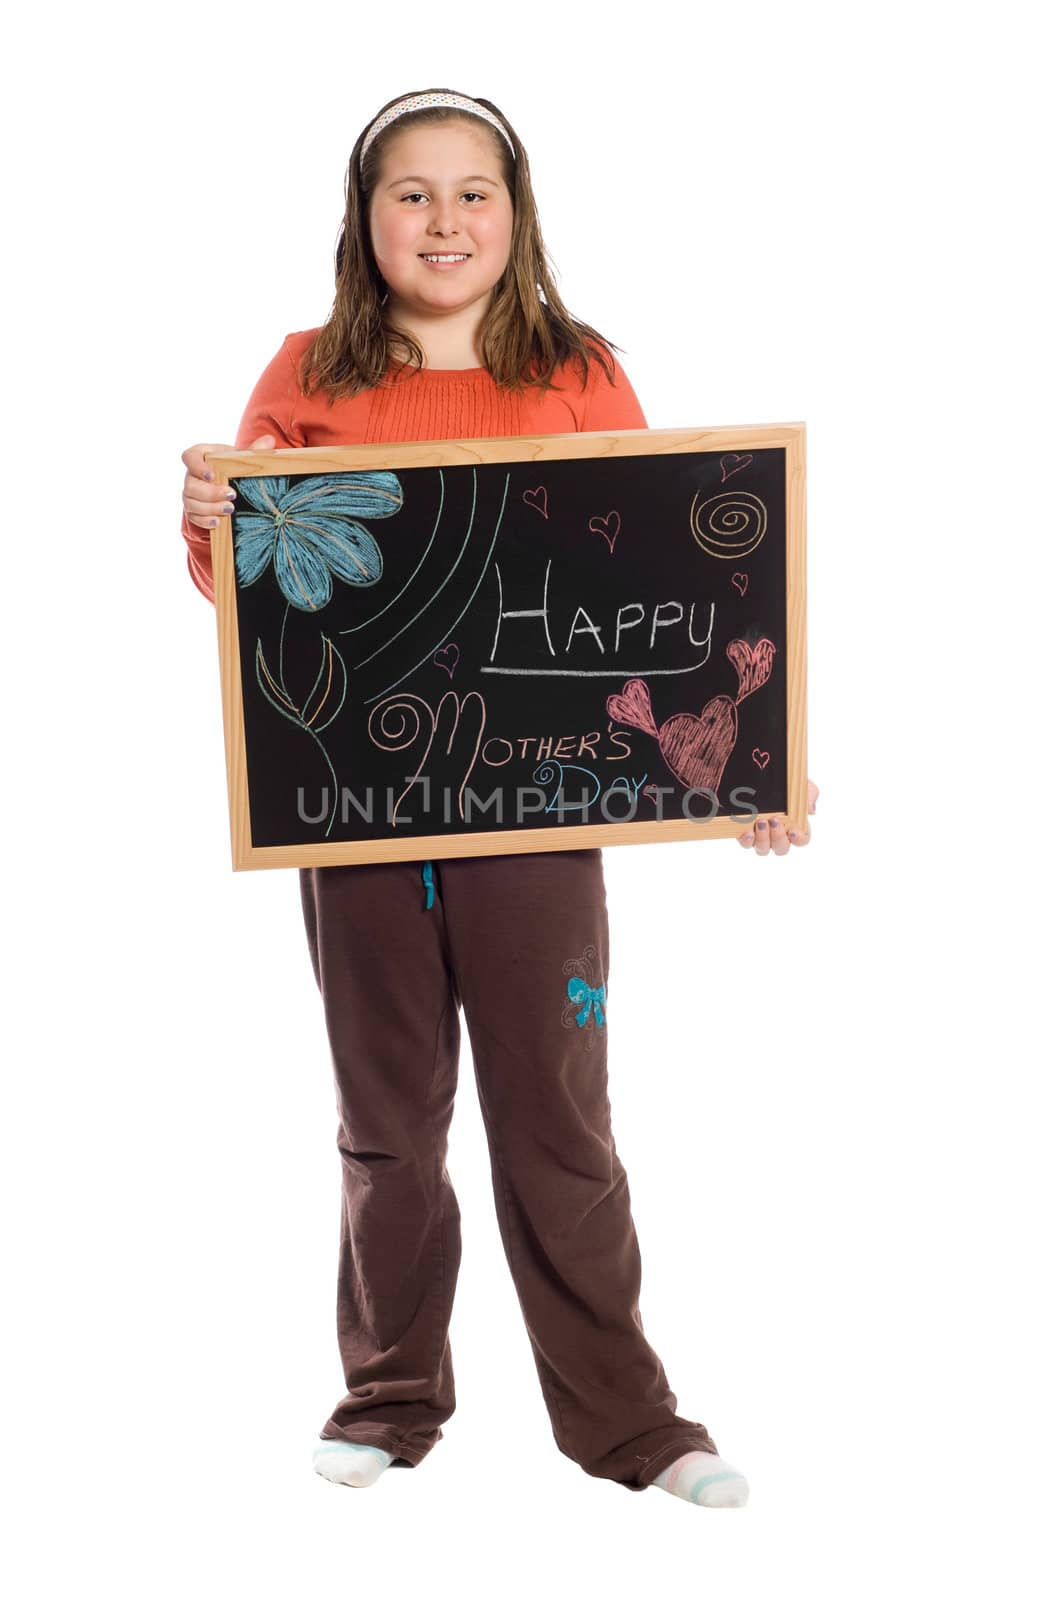 A young girl holding up a chalkboard for mothers day, isolated against a white background